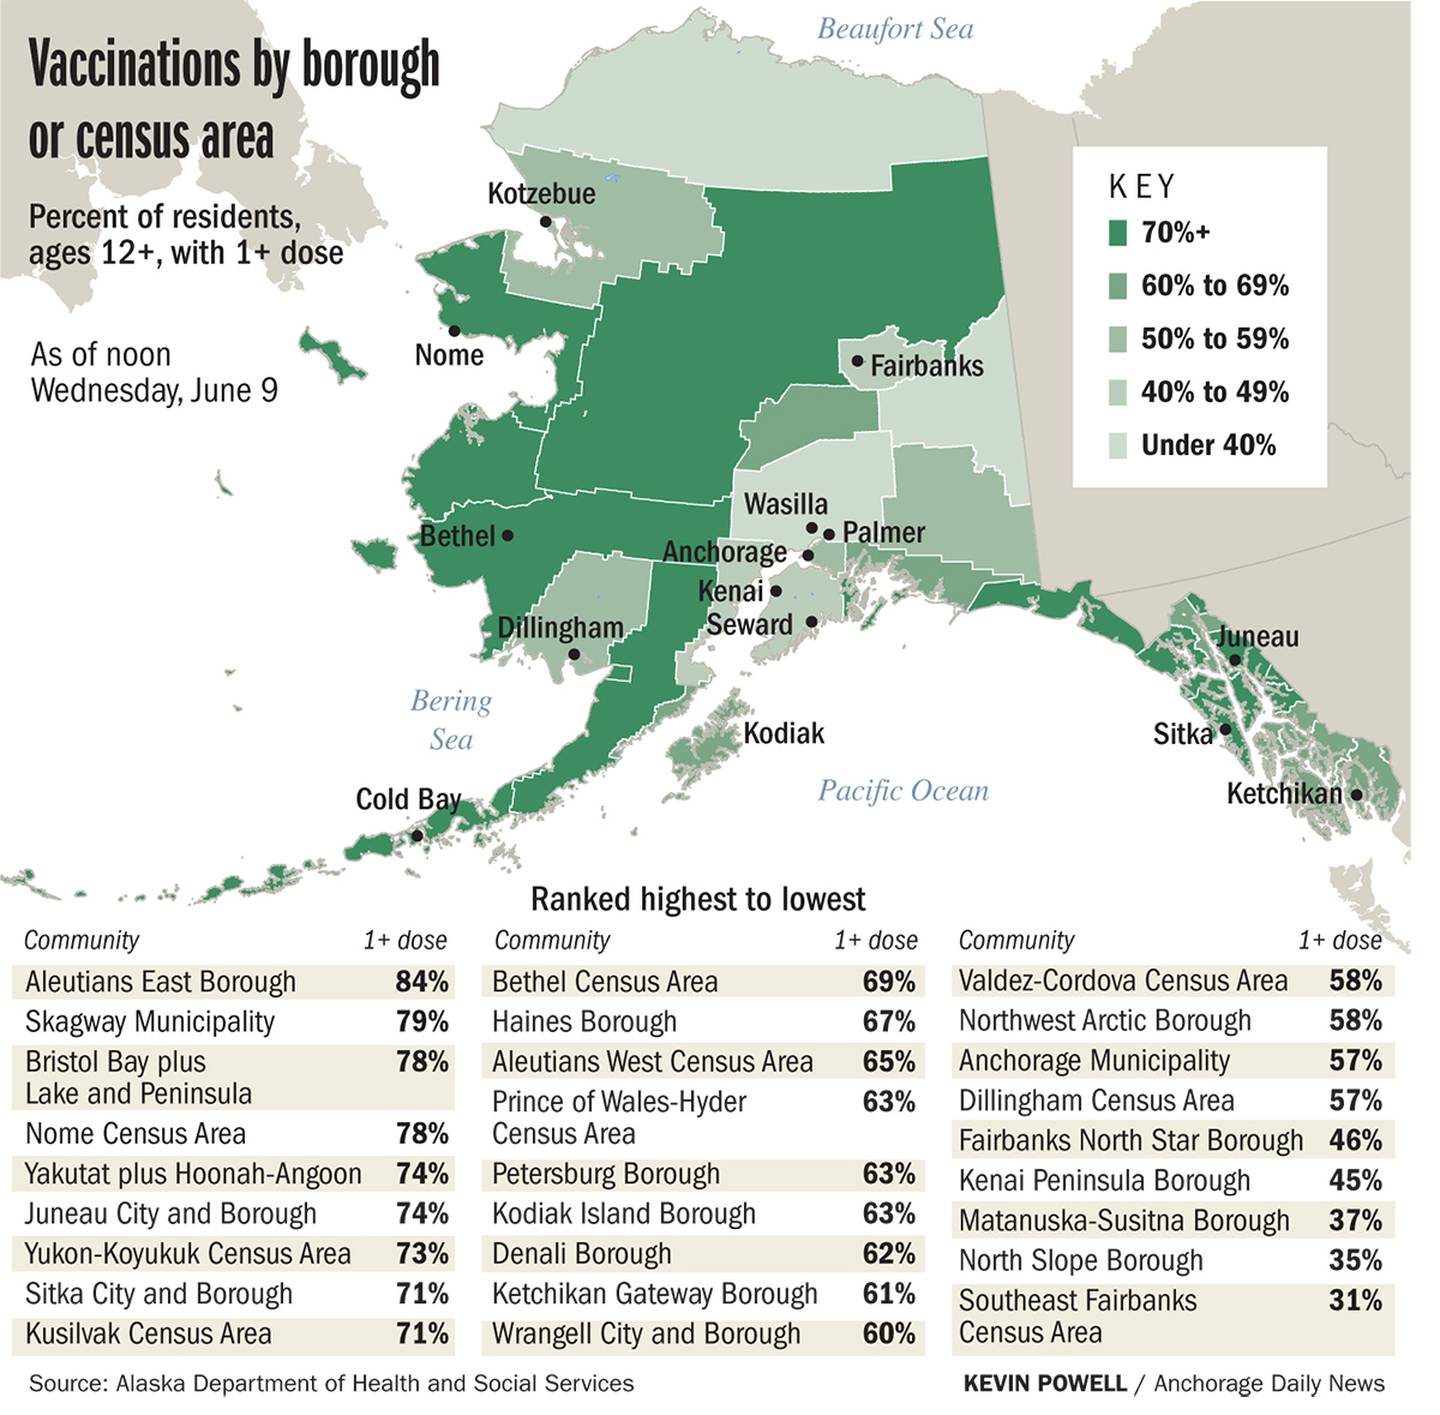 Vaccinations by borough or census area